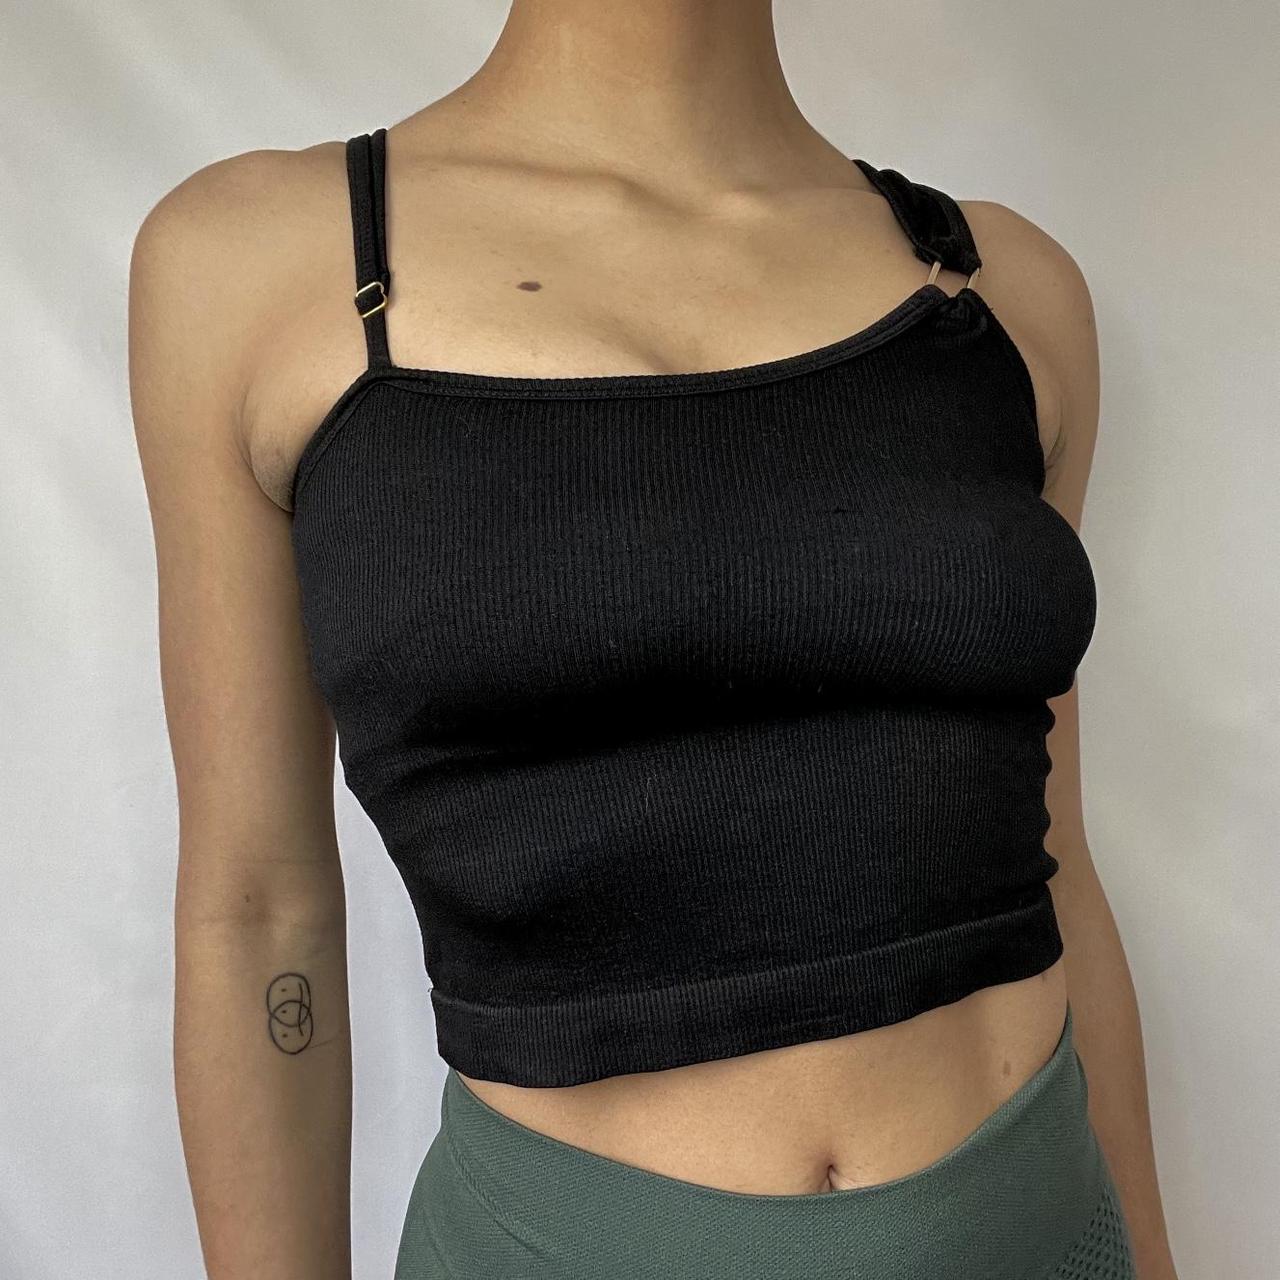 Product Image 2 - BLACK STRAPPED TANK TOP

 a